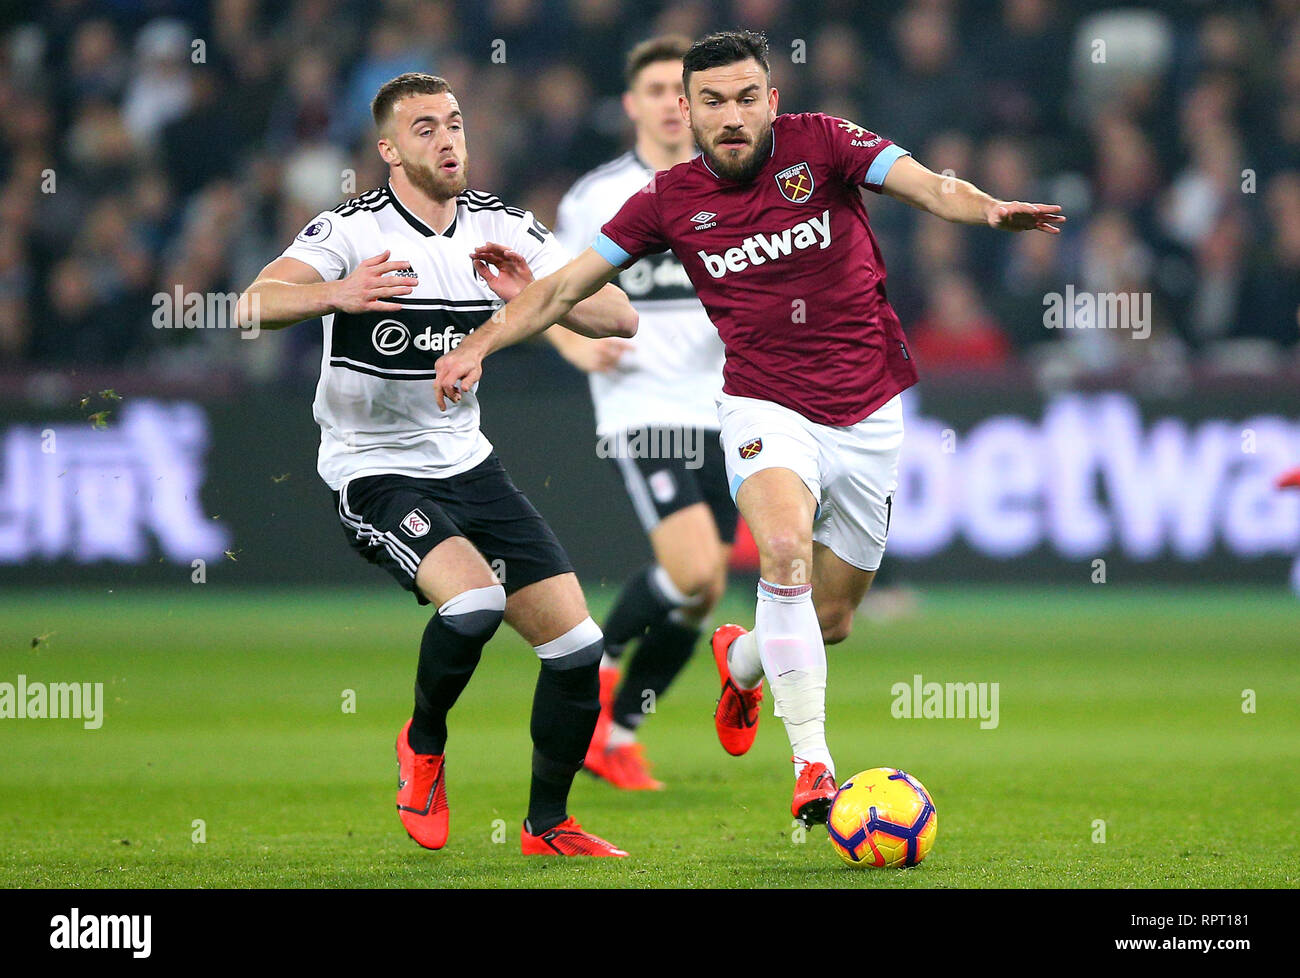 Fulham's Calum Chambers (left) and West Ham United's Robert Snodgrass battle for the ball and during the Premier League match at London Stadium. Stock Photo